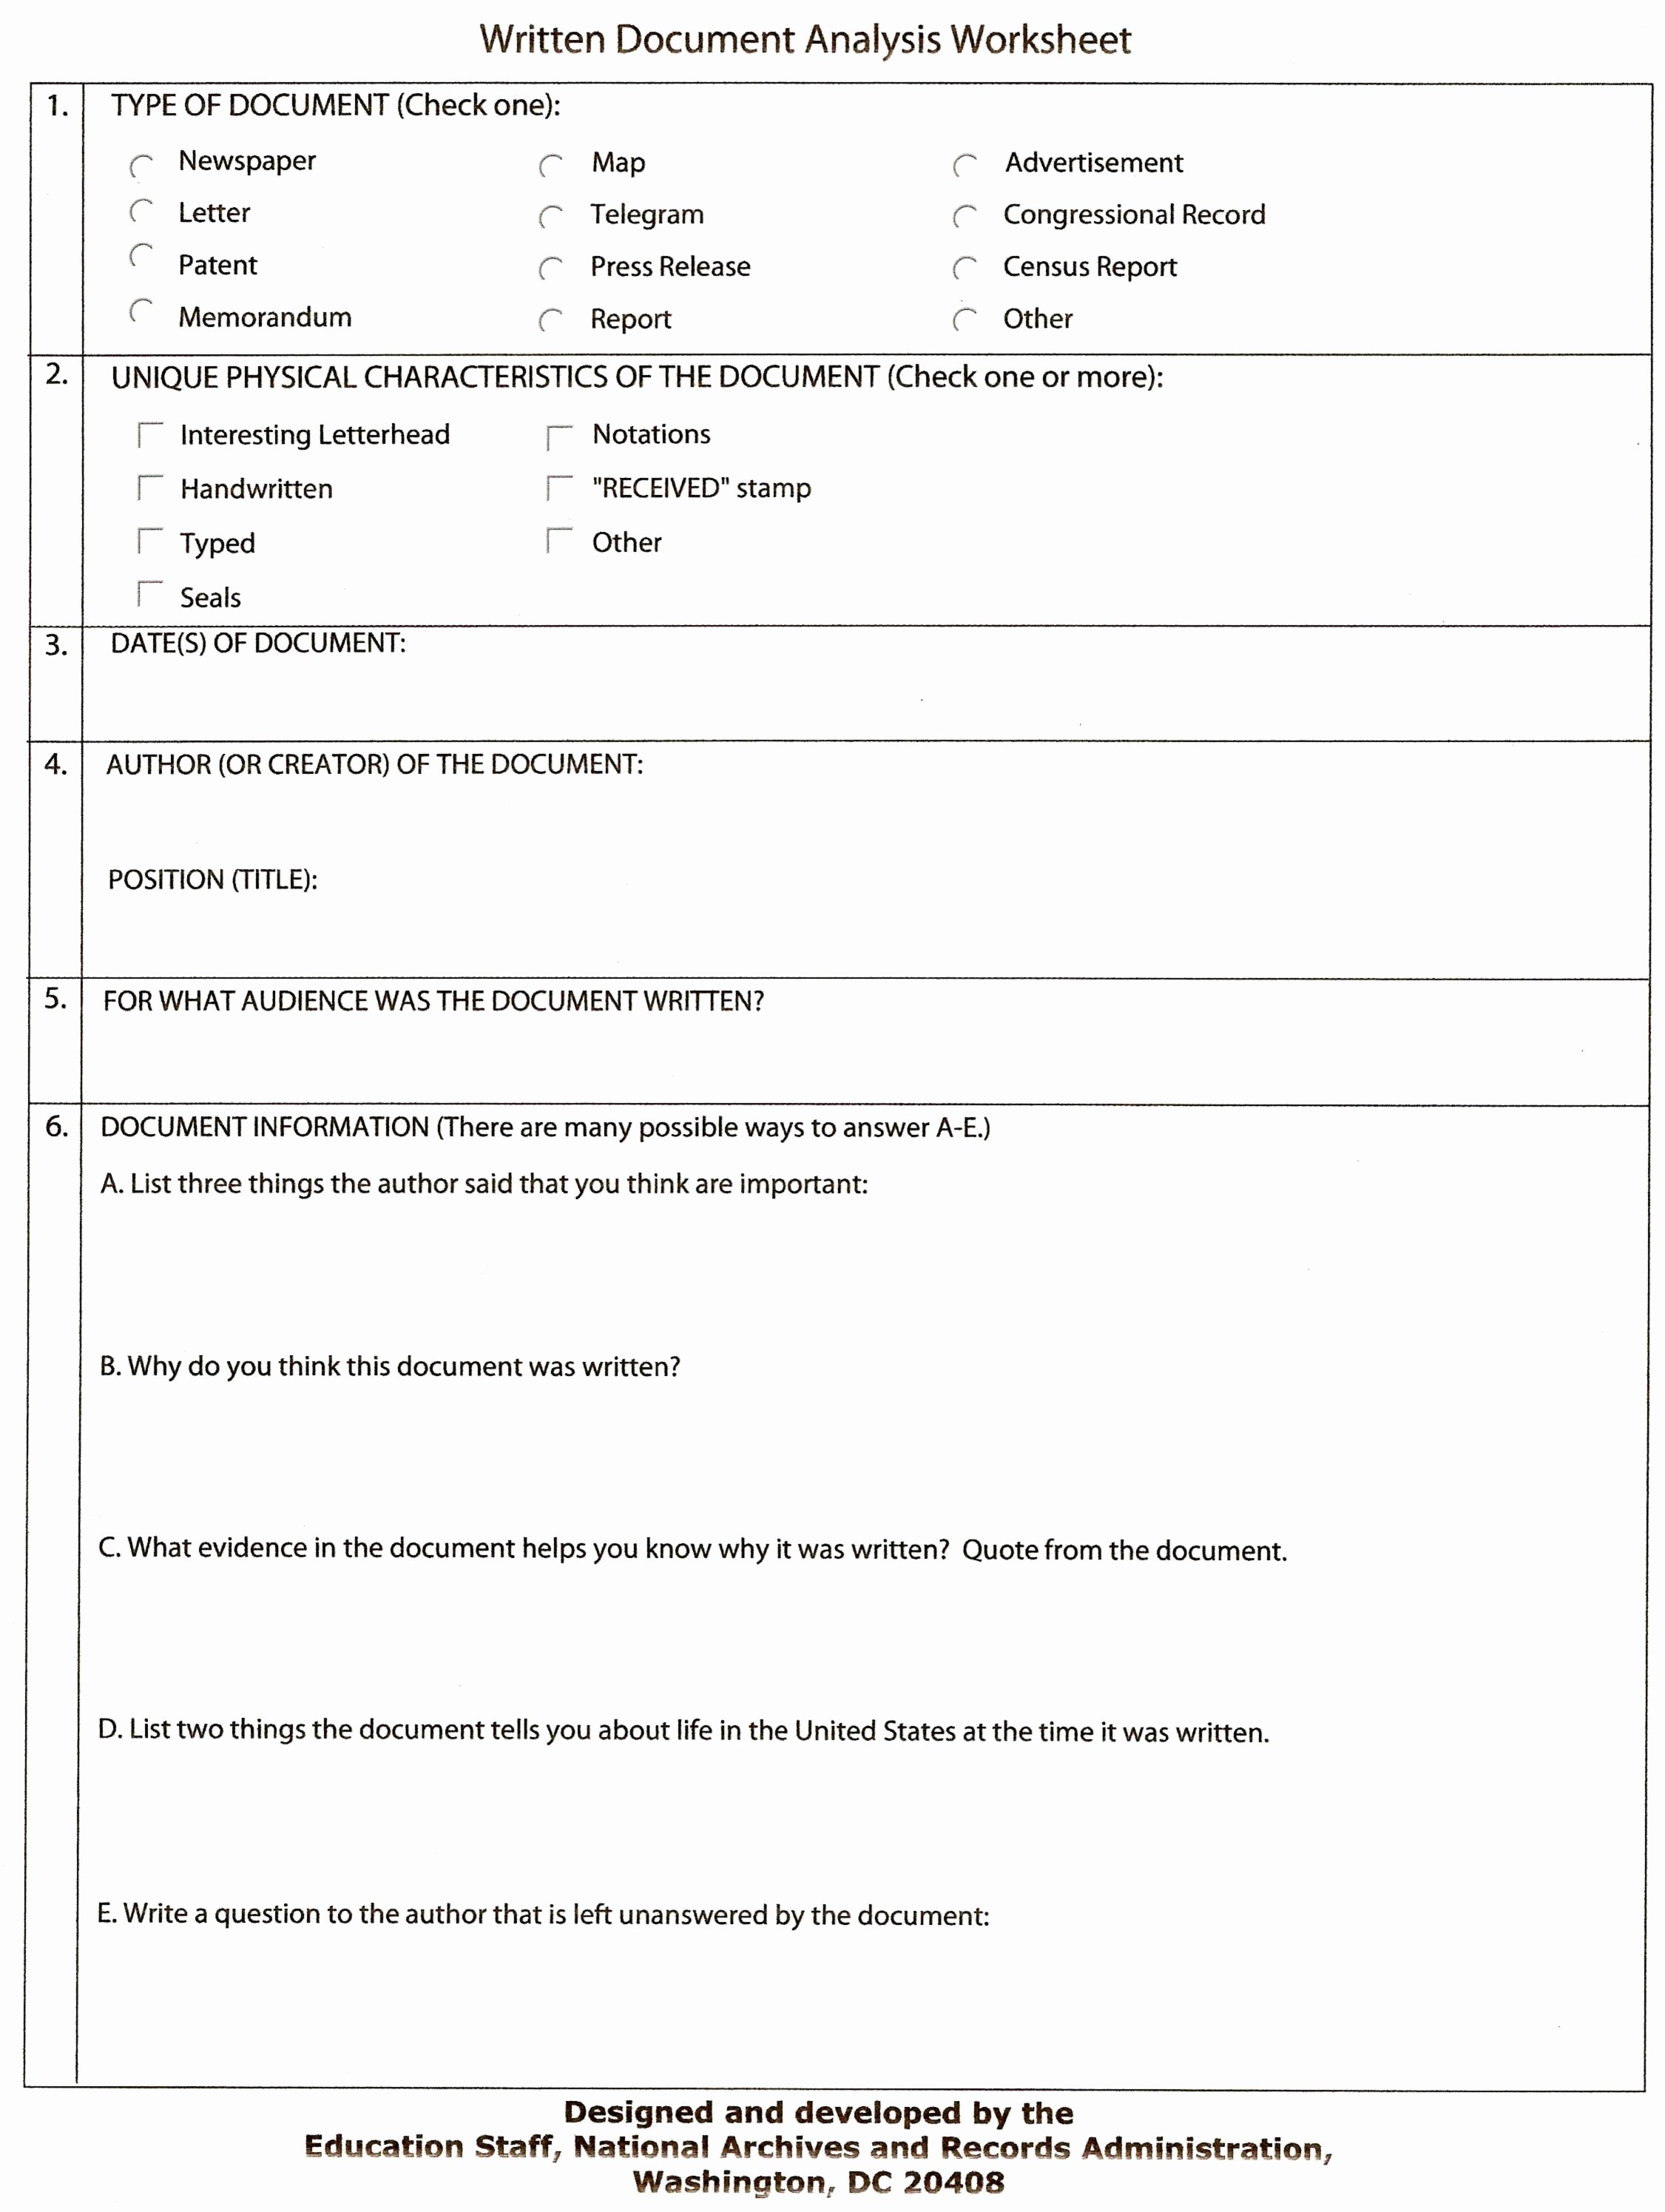 Cartoon Analysis Worksheet Answer Key Unique Historical Document Analysis Worksheet to Use with Primary